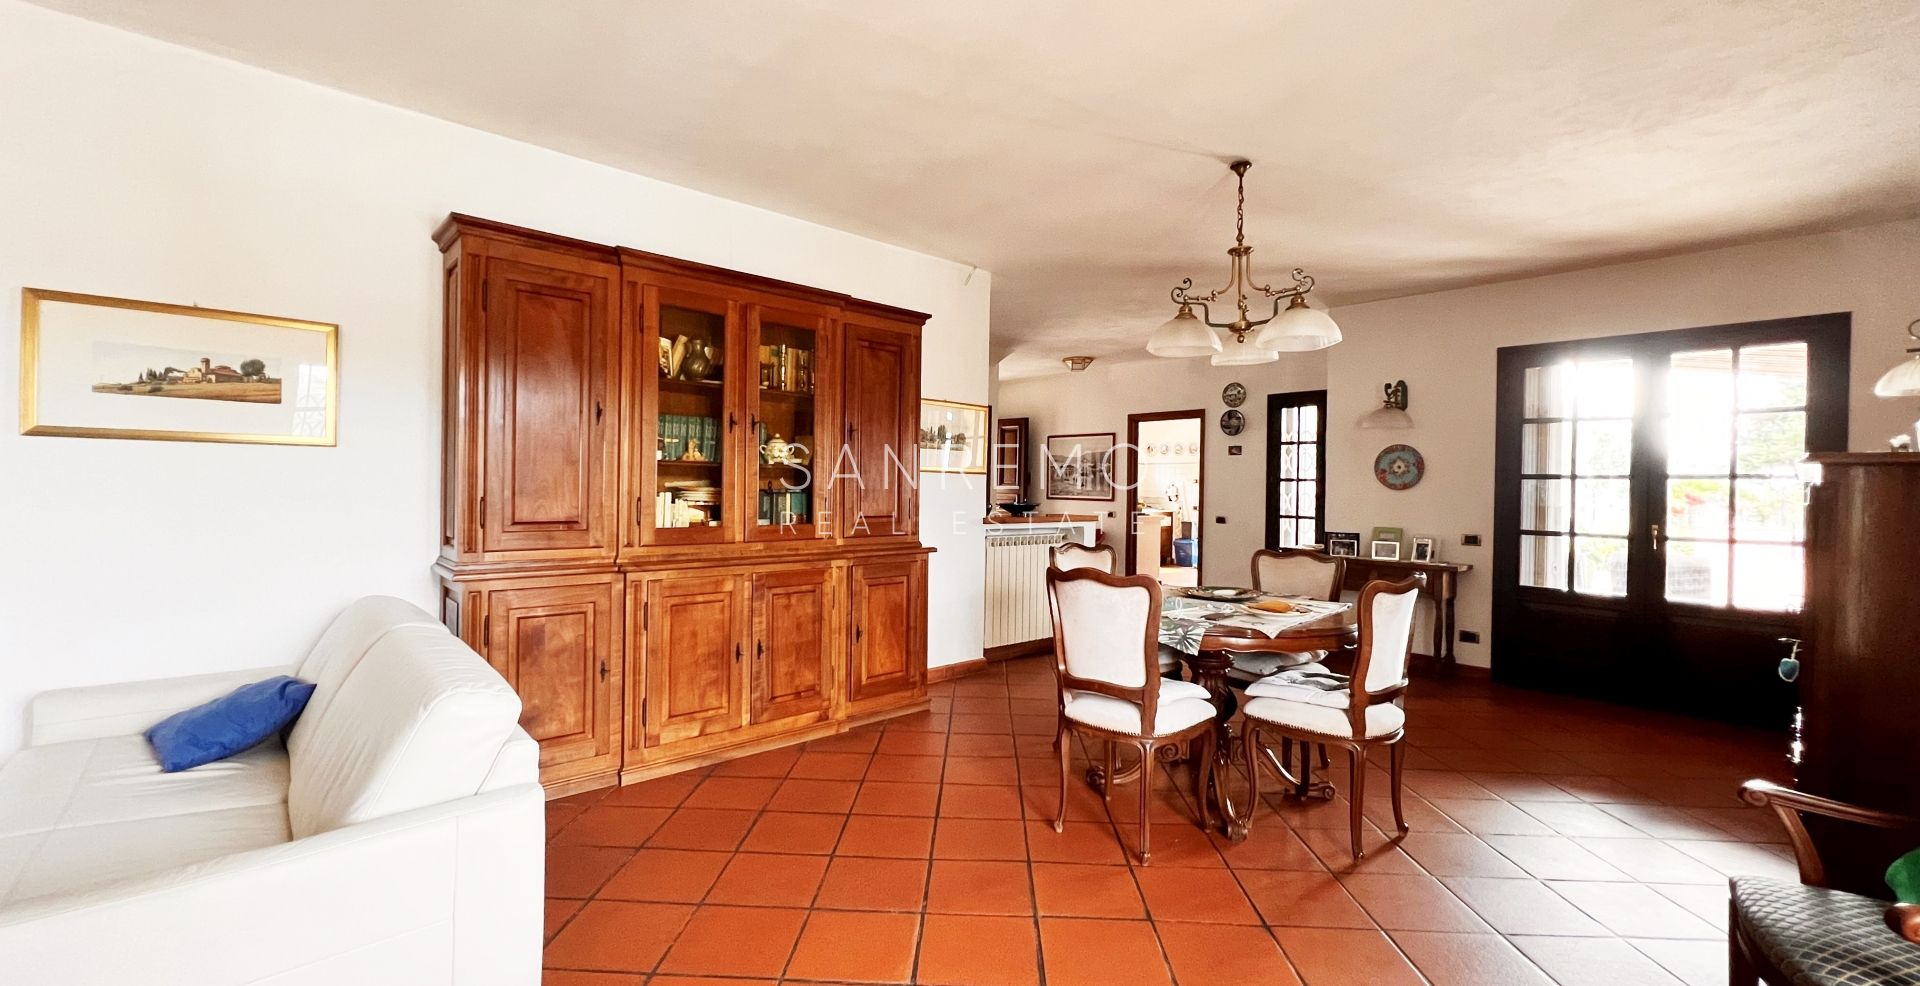 Bright villa in excellent condition on three levels with surrounding garden